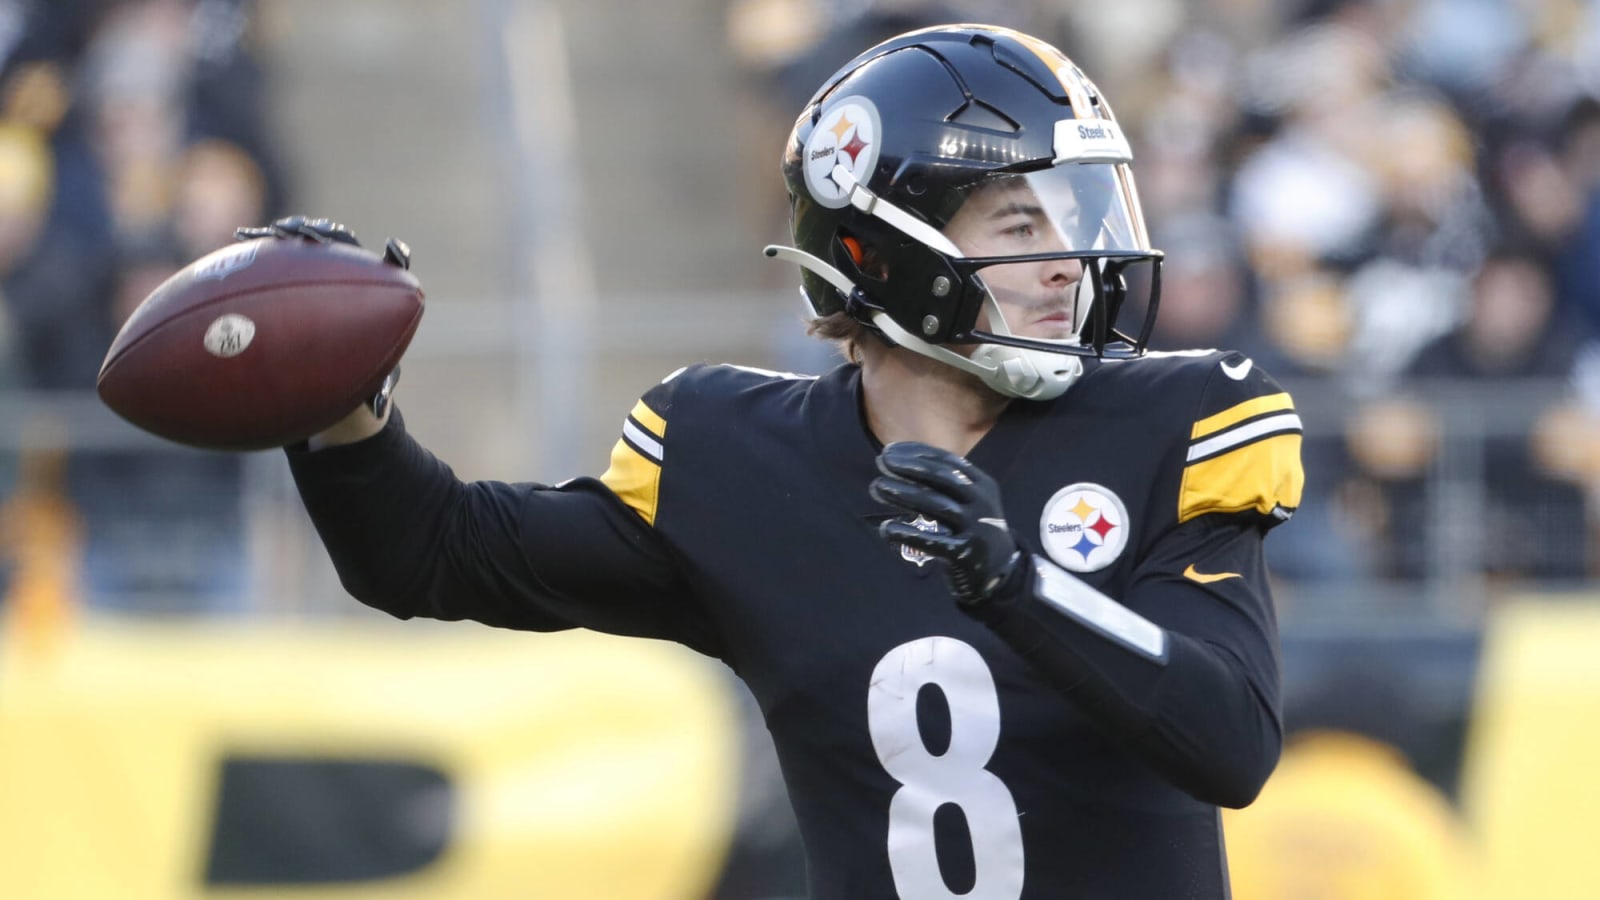 ESPN ranks the Steelers 2023 roster worst among AFC North teams